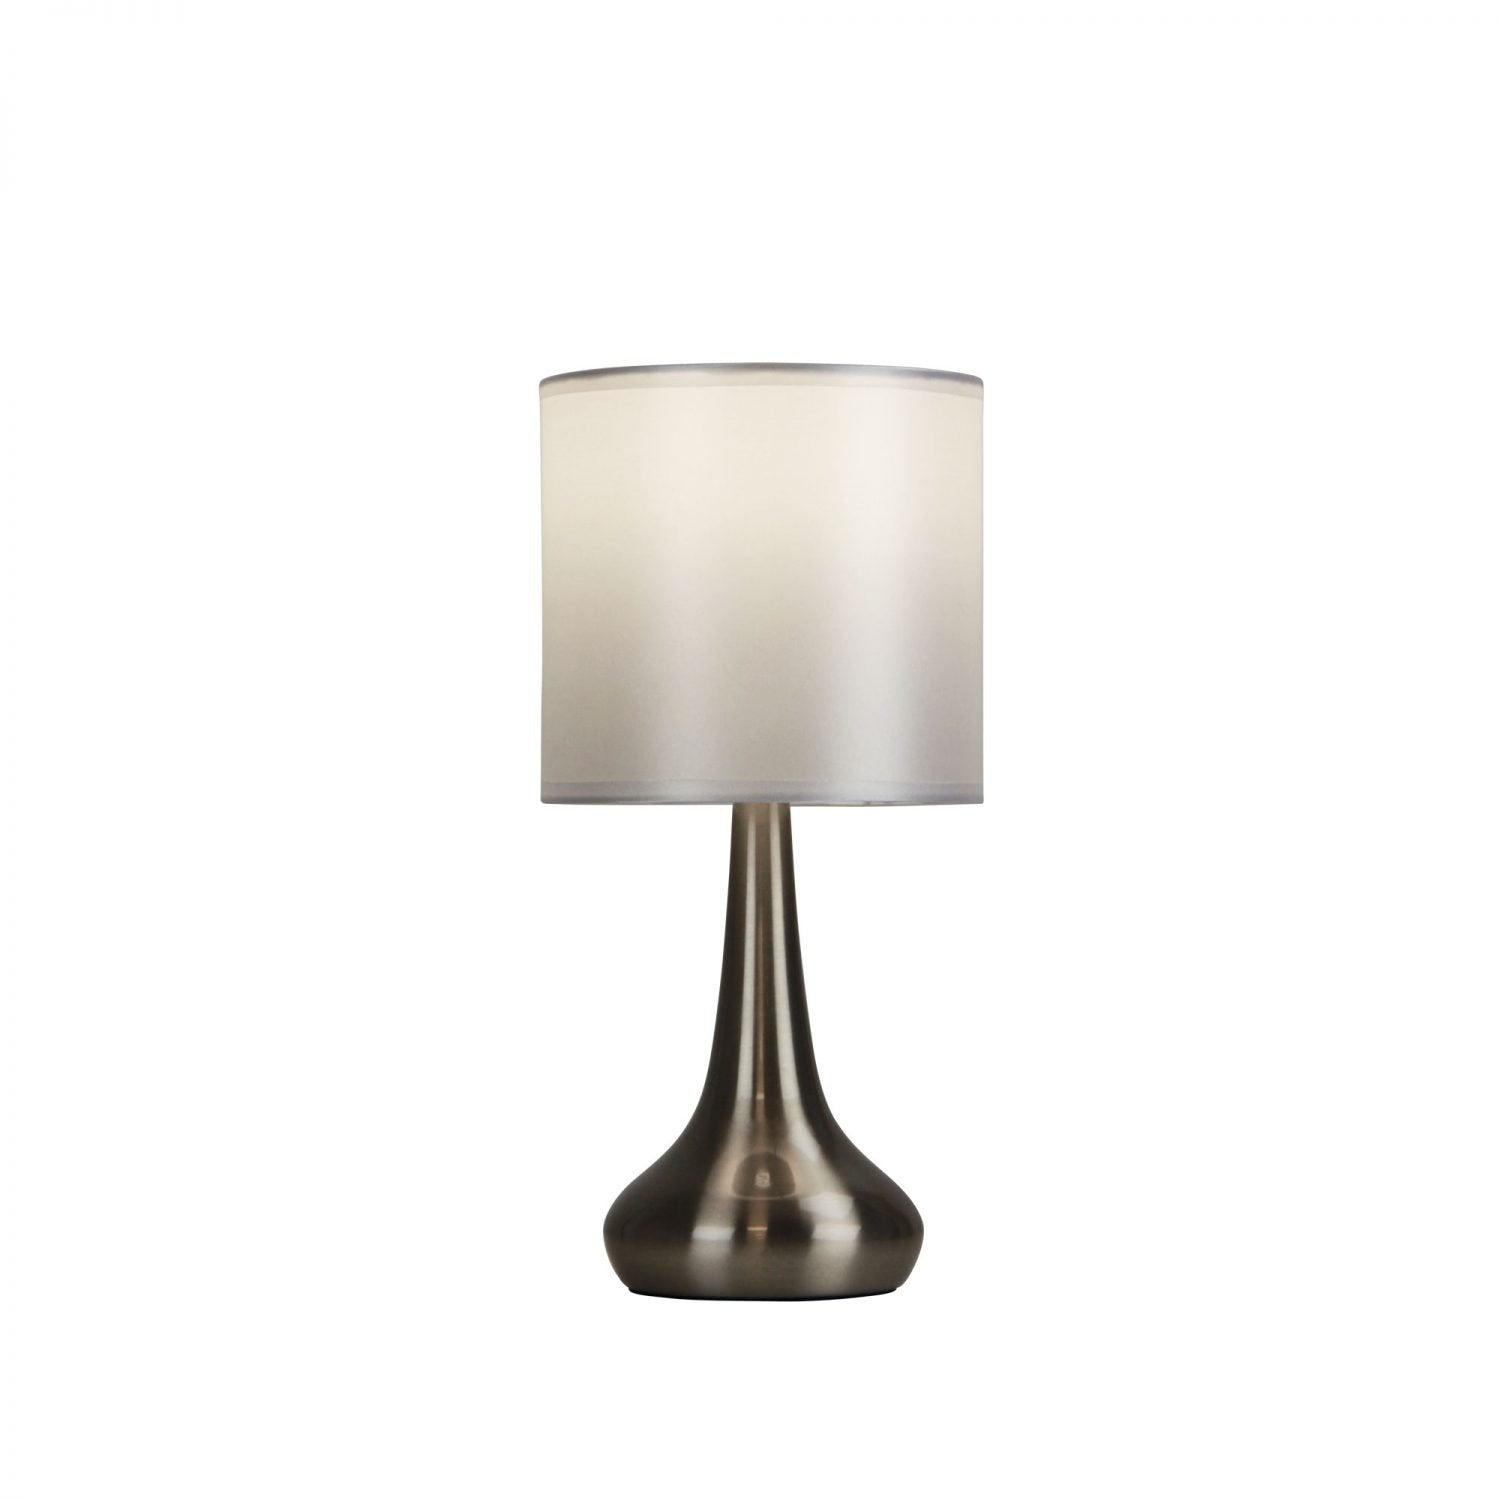 Lola 1 Light Touch Table Lamp Brushed Chrome - LF9205BCH